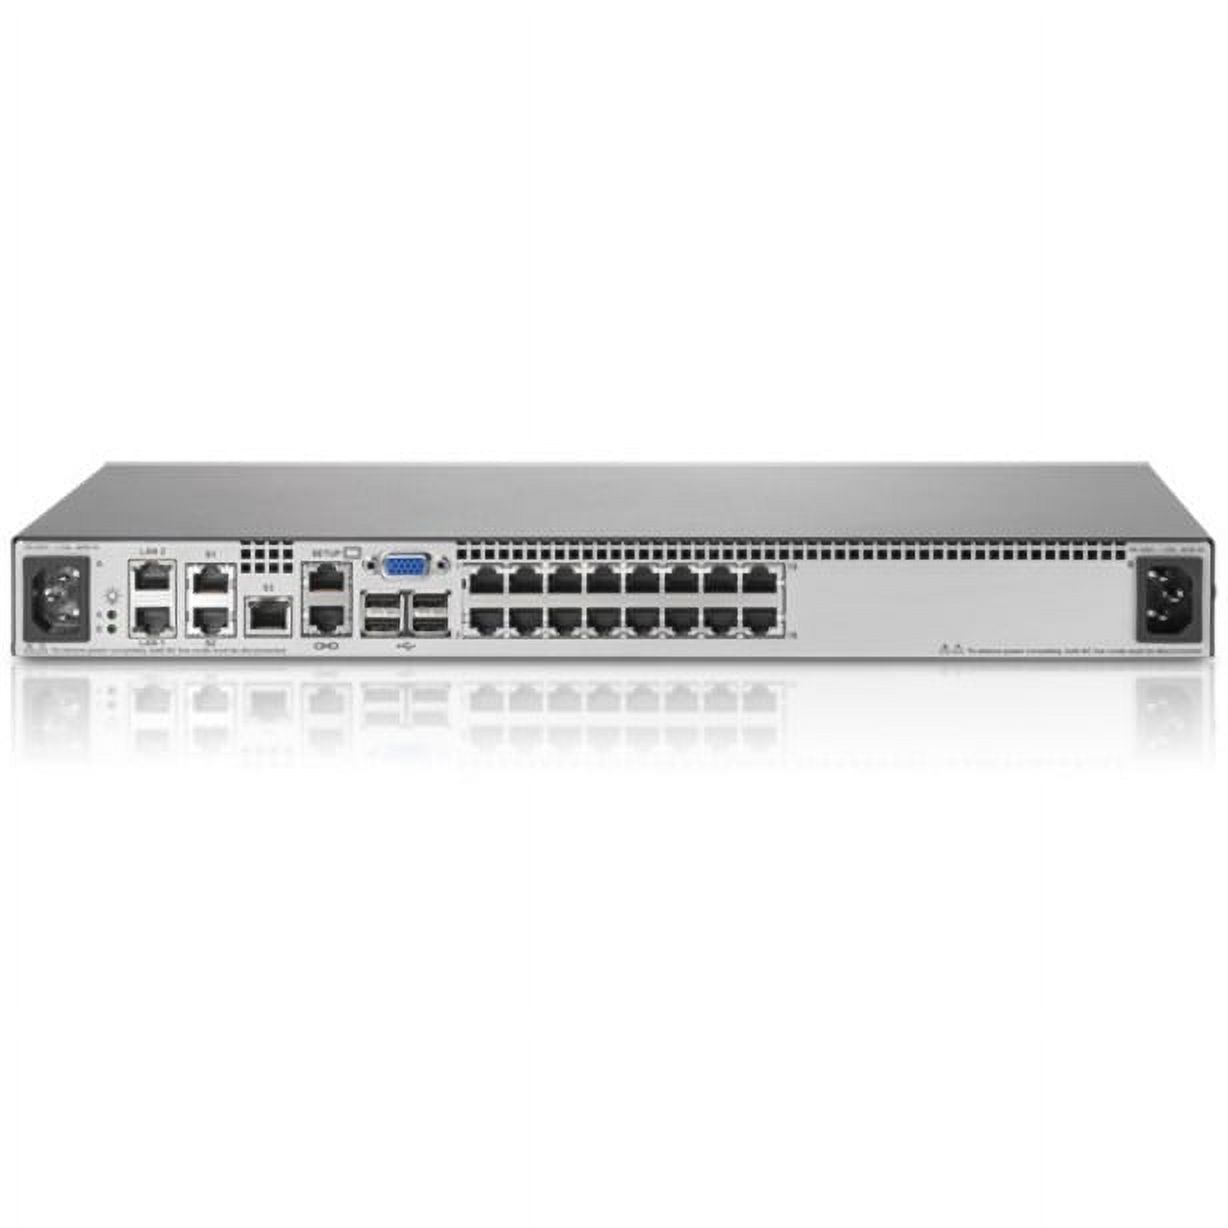 HPE IP Console G2 Switch with Virtual Media and CAC 2x1Ex16 - KVM switch - 16 ports - image 2 of 2